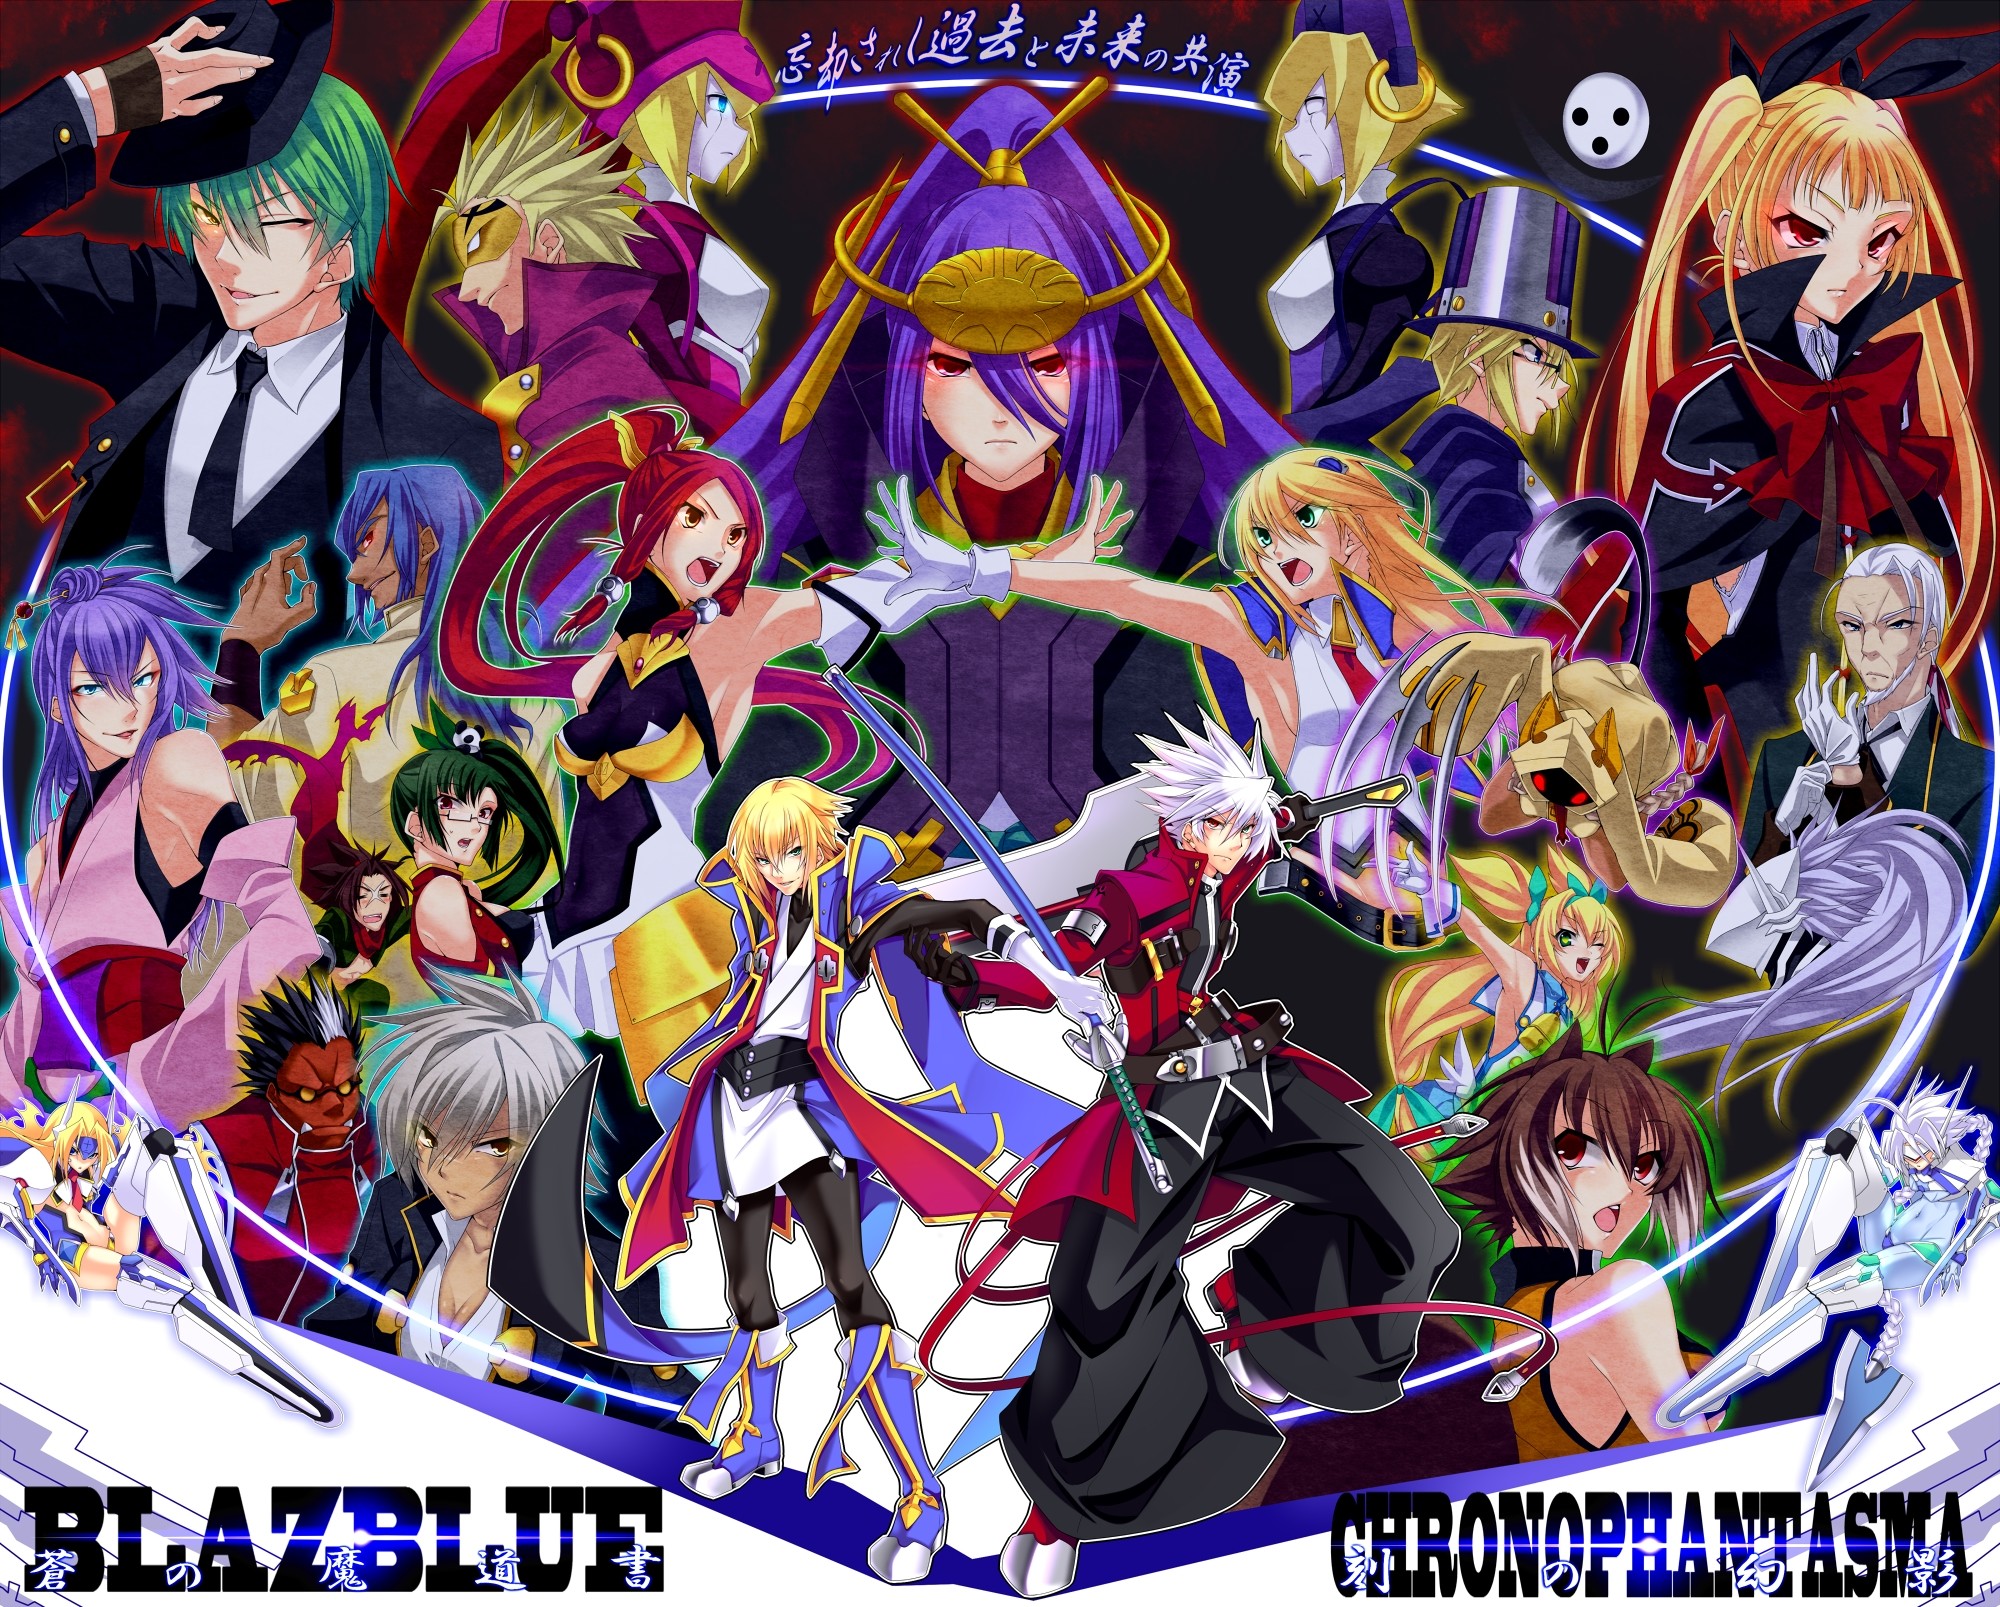 2000x1607 blazblue images Blazblue HD wallpaper and background photos